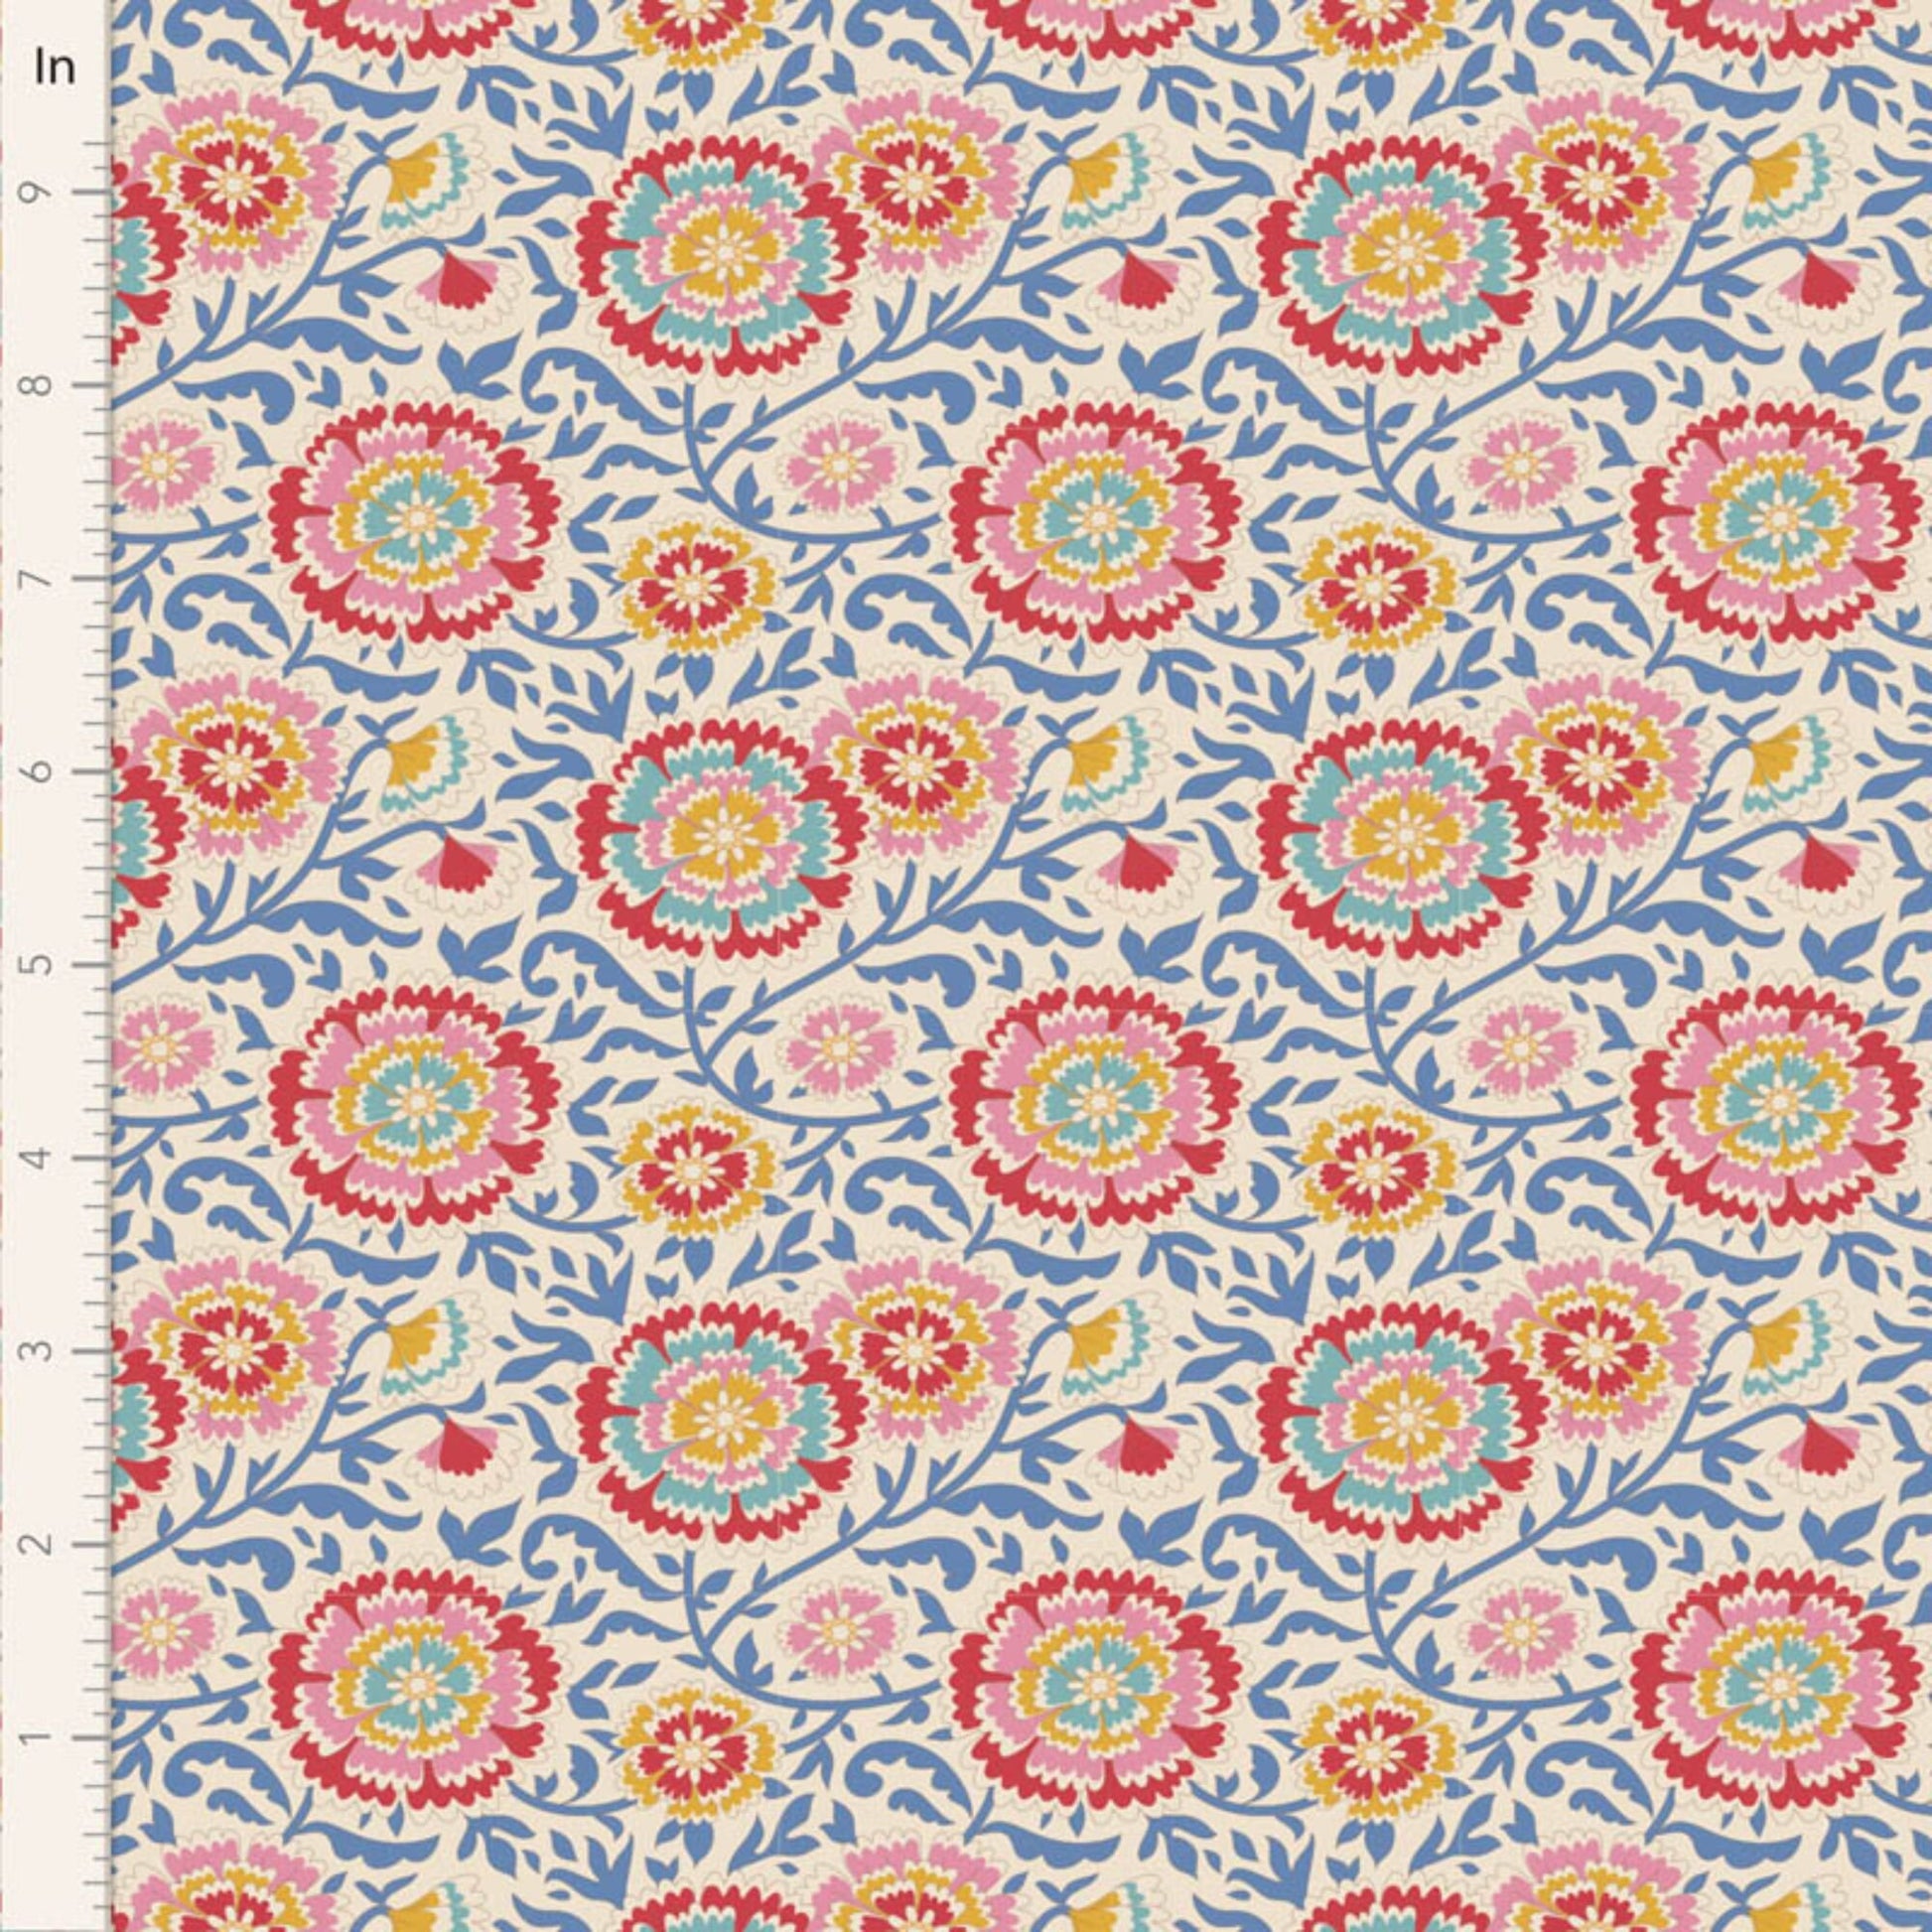 Elodie Blue Jubilee Tilda Fabric Tone Finnanger 100% Quilters Cotton Fabric Fetish